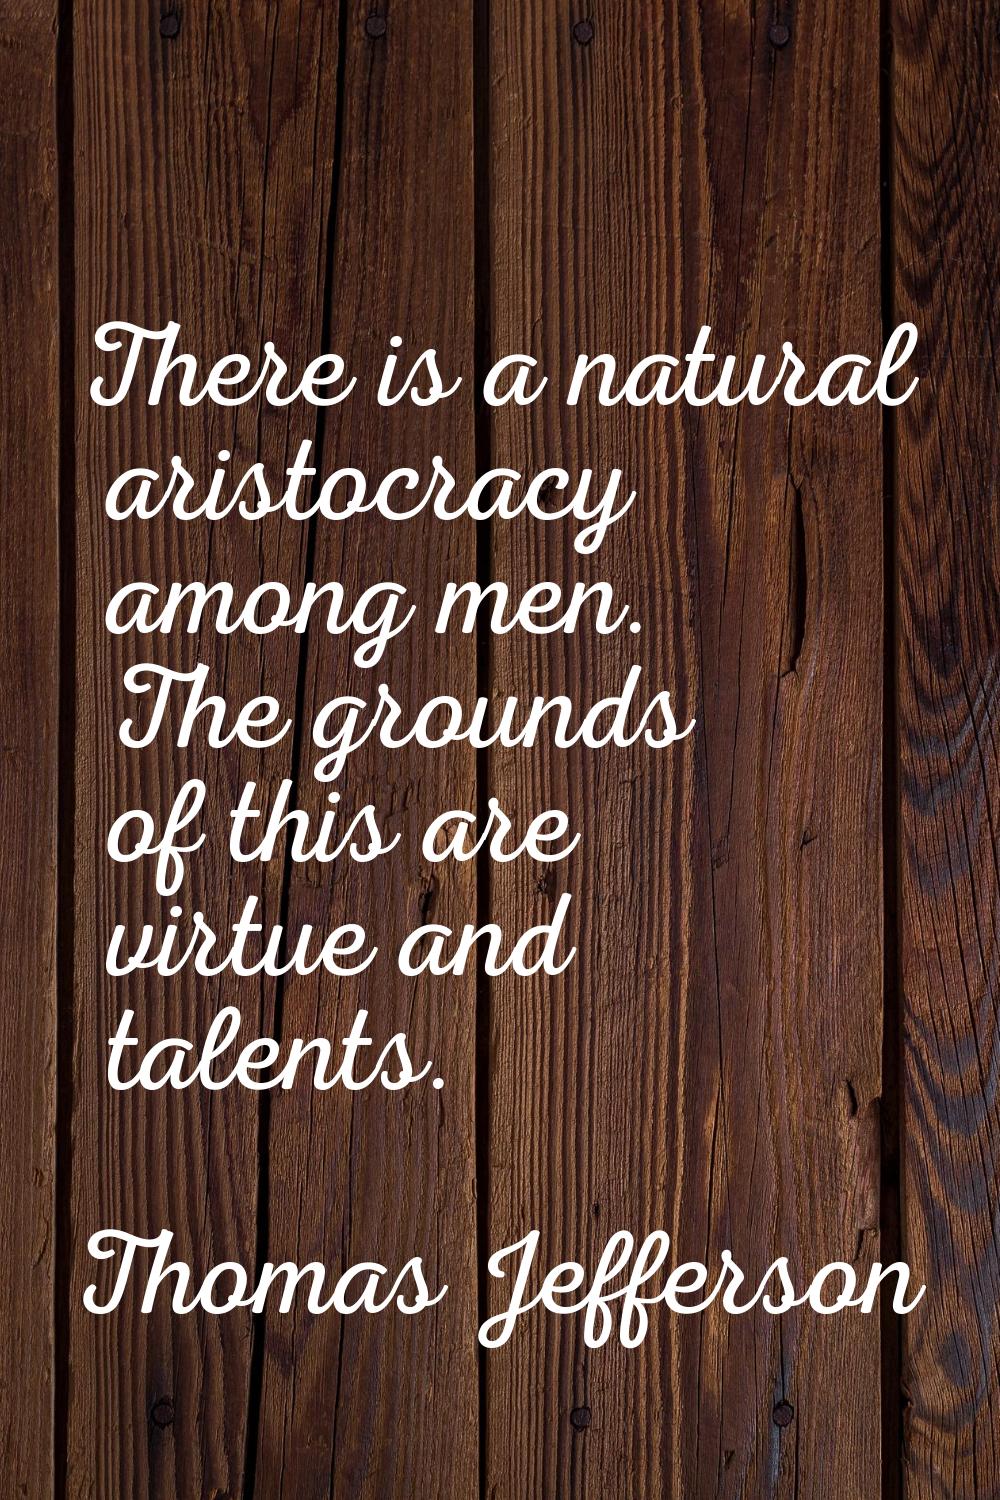 There is a natural aristocracy among men. The grounds of this are virtue and talents.